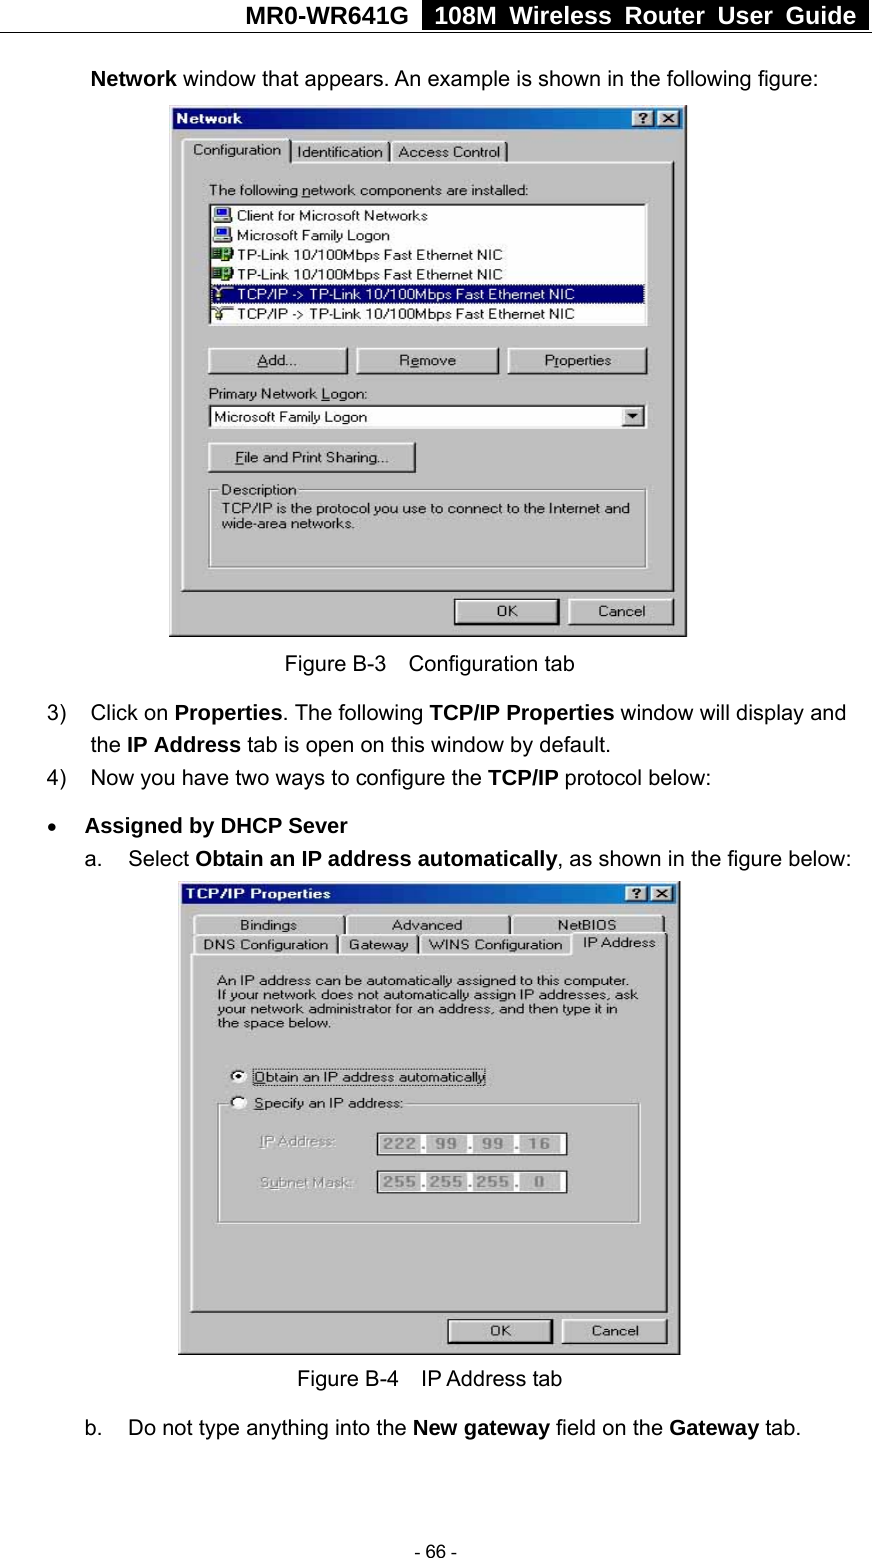 MR0-WR641G   108M Wireless Router User Guide  Network window that appears. An example is shown in the following figure:  Figure B-3  Configuration tab 3) Click on Properties. The following TCP/IP Properties window will display and the IP Address tab is open on this window by default. 4)  Now you have two ways to configure the TCP/IP protocol below: • Assigned by DHCP Sever a. Select Obtain an IP address automatically, as shown in the figure below:  Figure B-4  IP Address tab b.  Do not type anything into the New gateway field on the Gateway tab.    - 66 - 